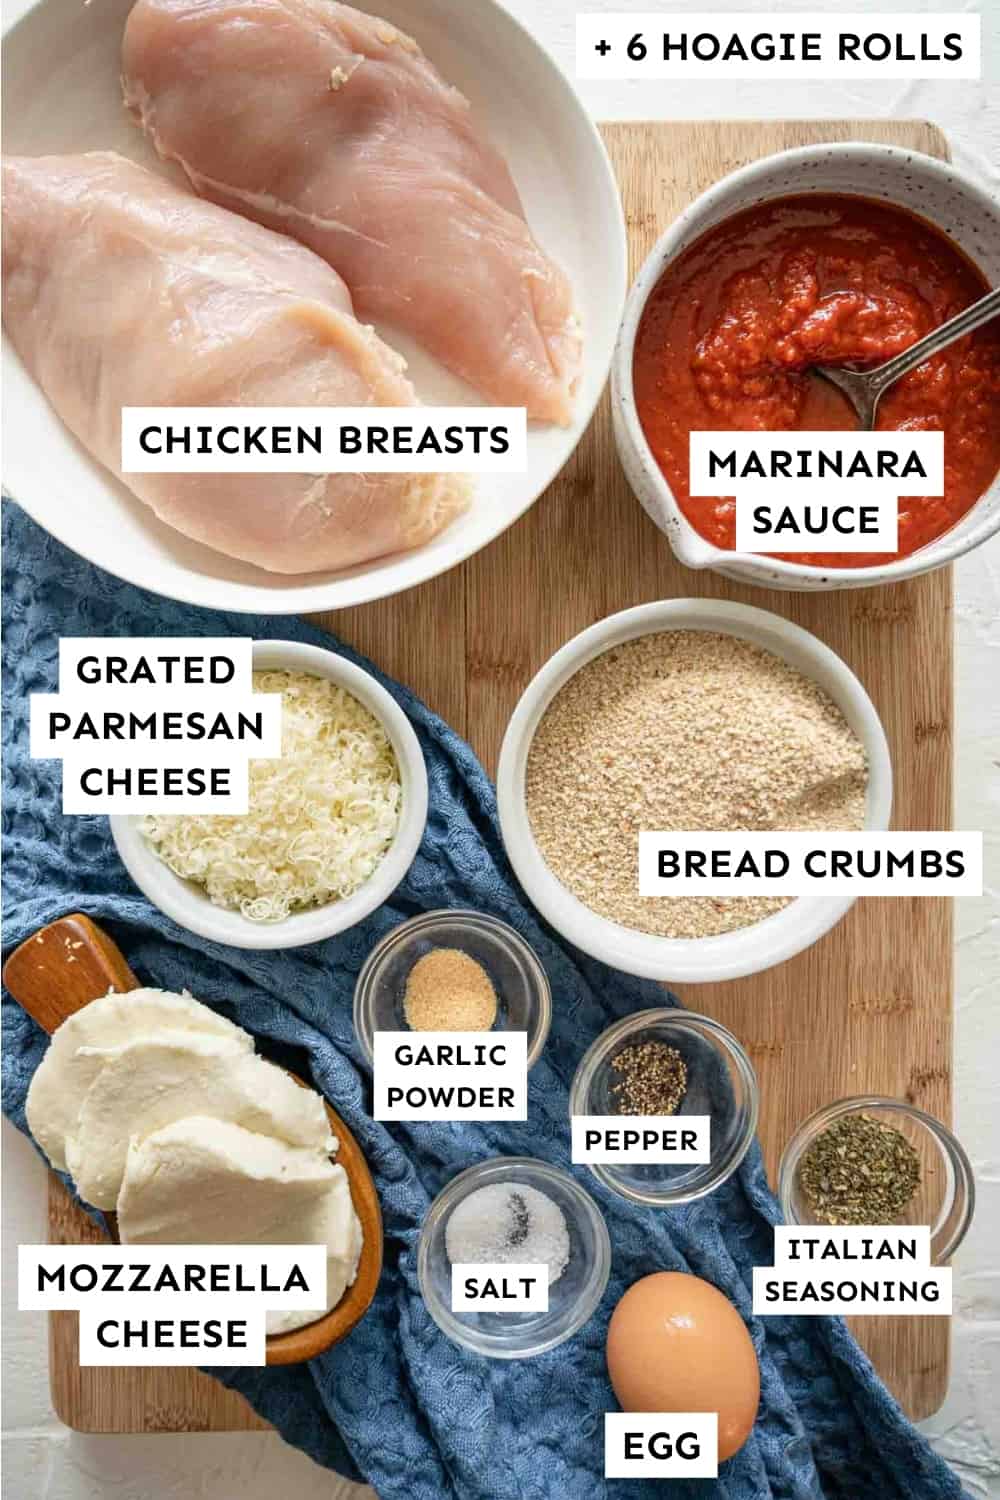 Ingredients laid out for Chicken Parmesan Sandwiches.